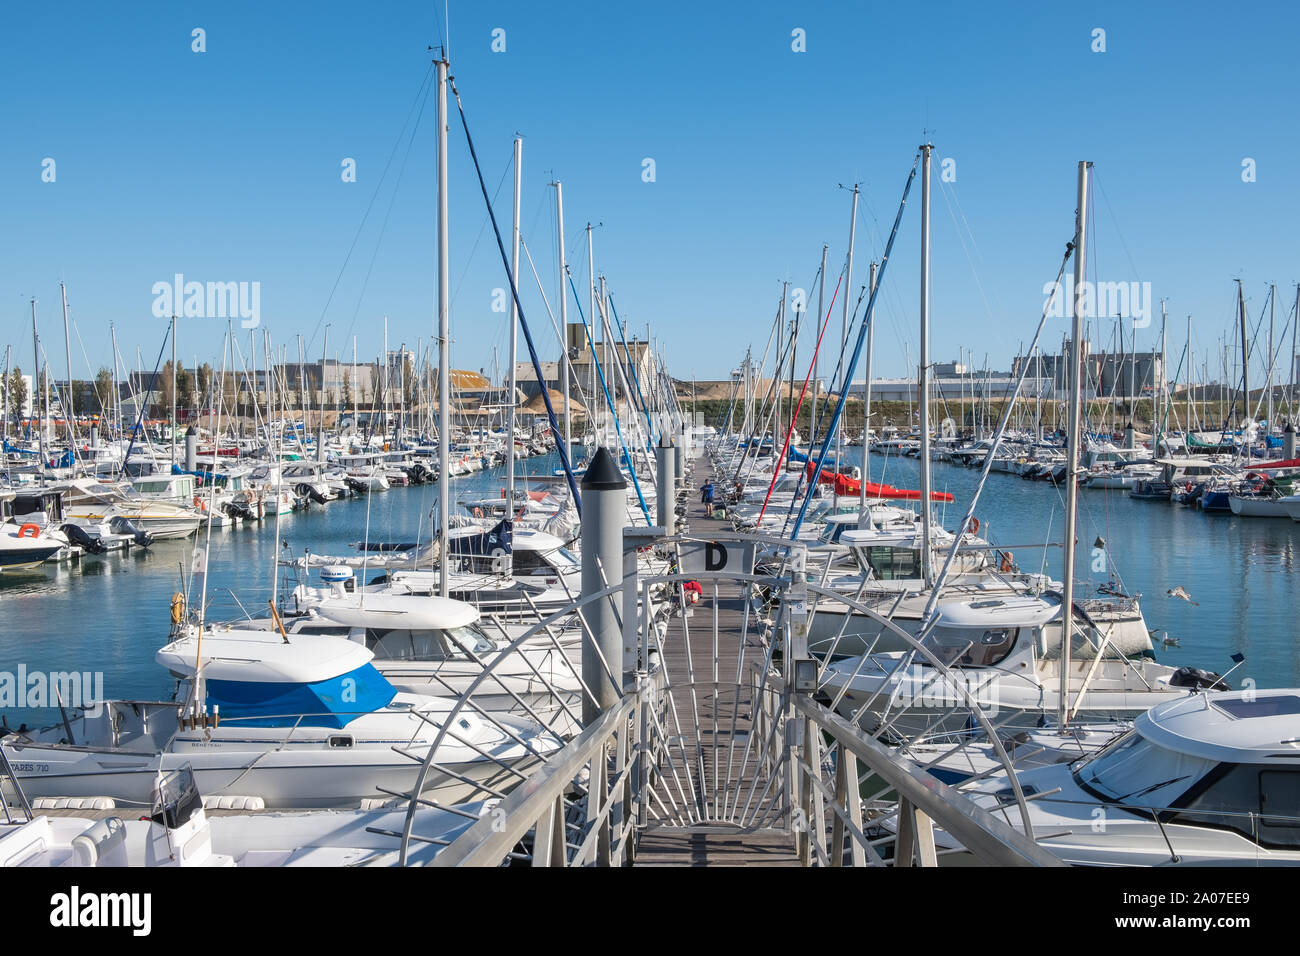 Yachts moored in the harbour at Les Sables d'Olonne in the Vendee area of Western France Stock Photo